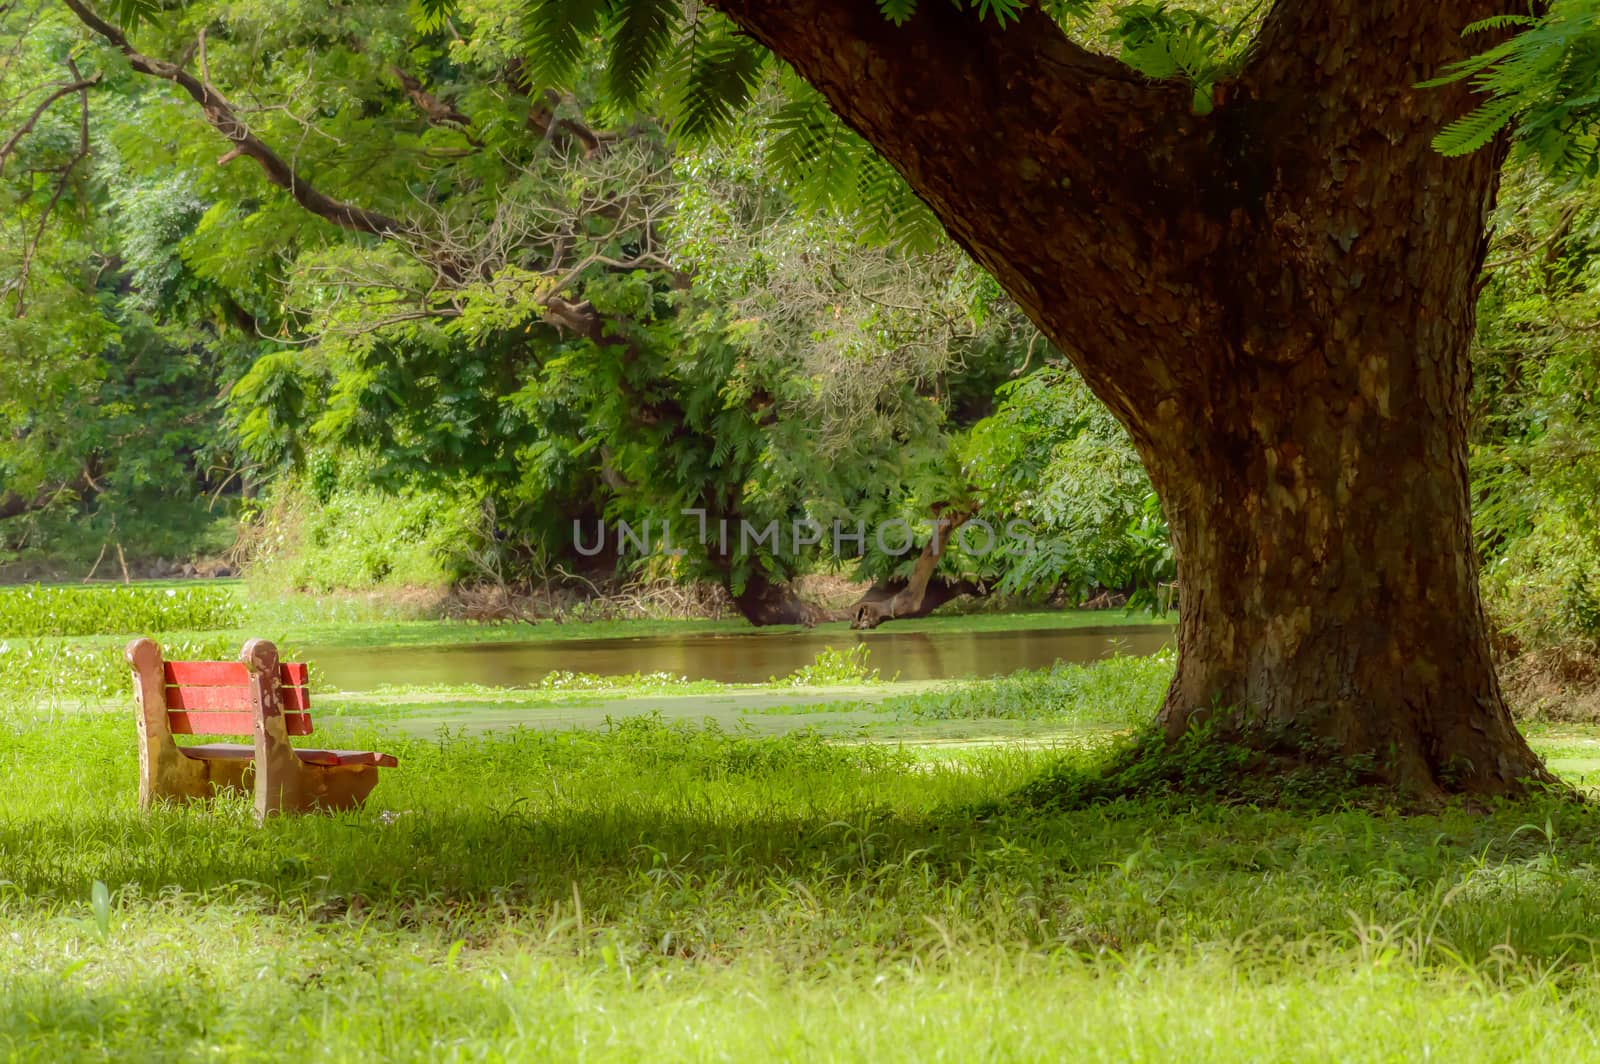 Red color bench in the autumn park. Single wooden park bench in a lush green botanical garden on tree background. ( Kolkata, India )